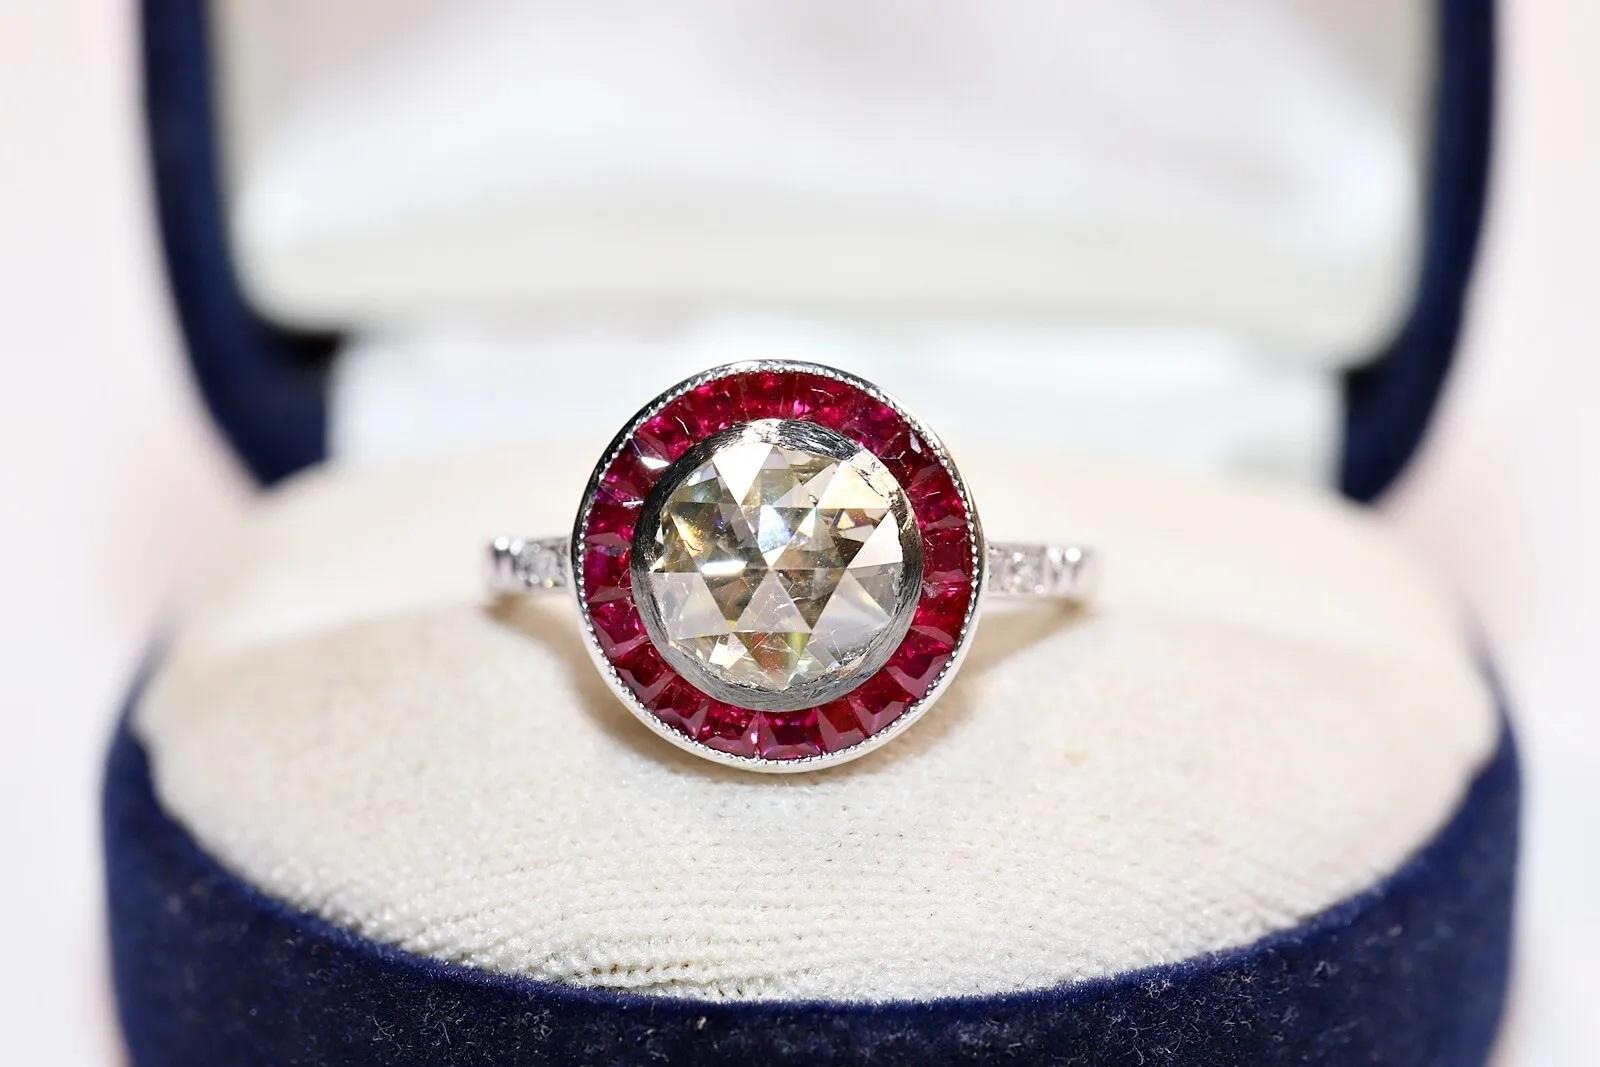 In very good condition.
Total weight is 5.2 grams.
Totally is center rose cut diamond 1.04 carat.
The center rose cut diamond L color and s1.
Totally is side diamond 0.10 carat.
The side diamond is G color and vs clarity.
Totally is caliber ruby